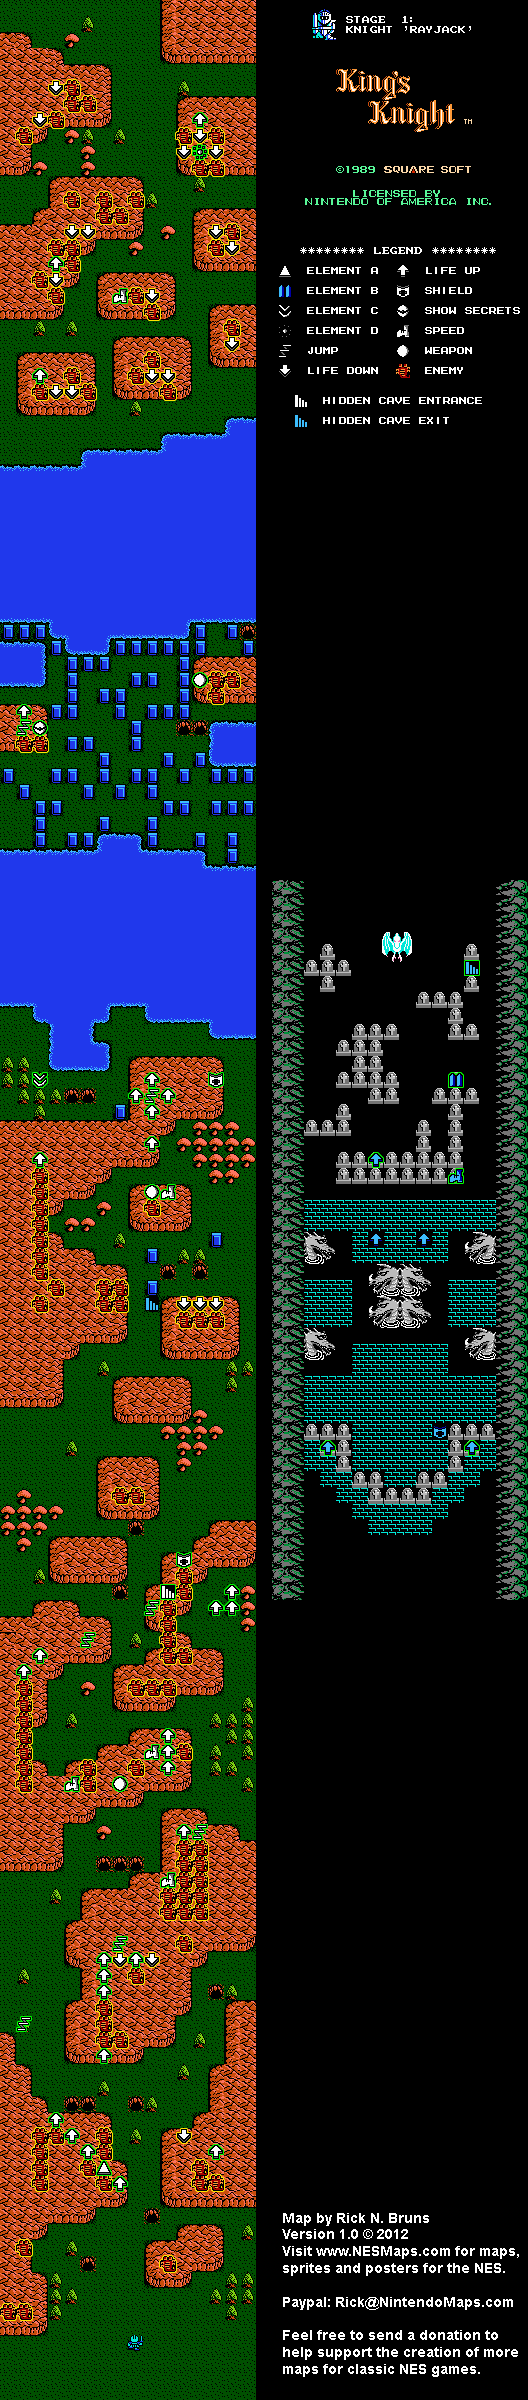 King's Knight - Stage 1 - Nintendo NES Map